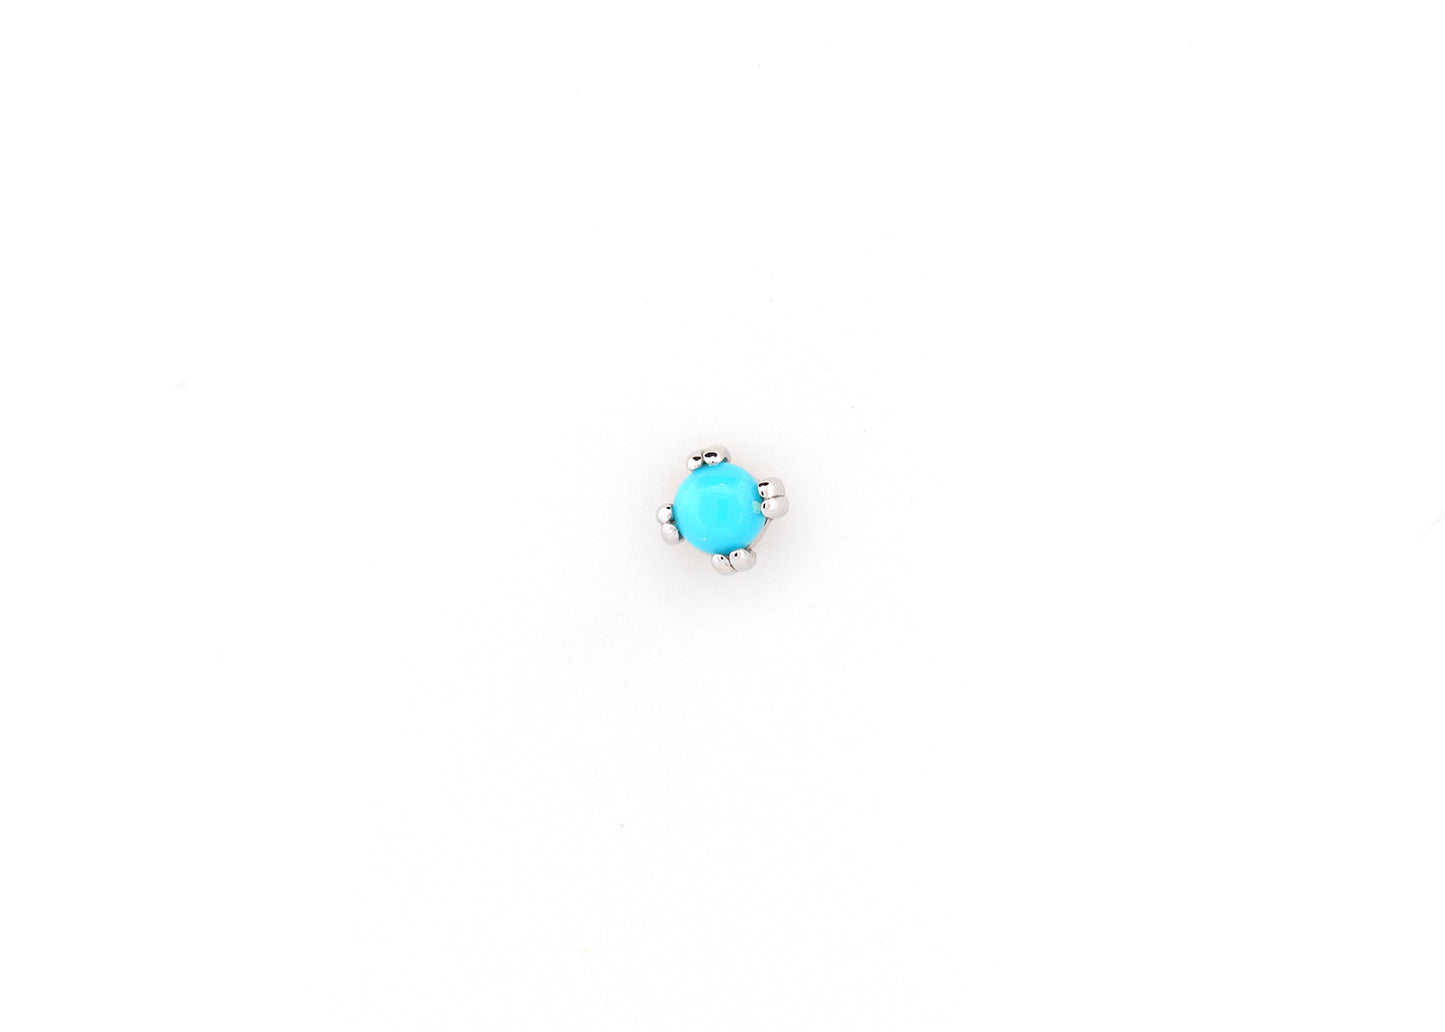 BVLA 2mm Genuine Turquoise Cab Prong Threadless End